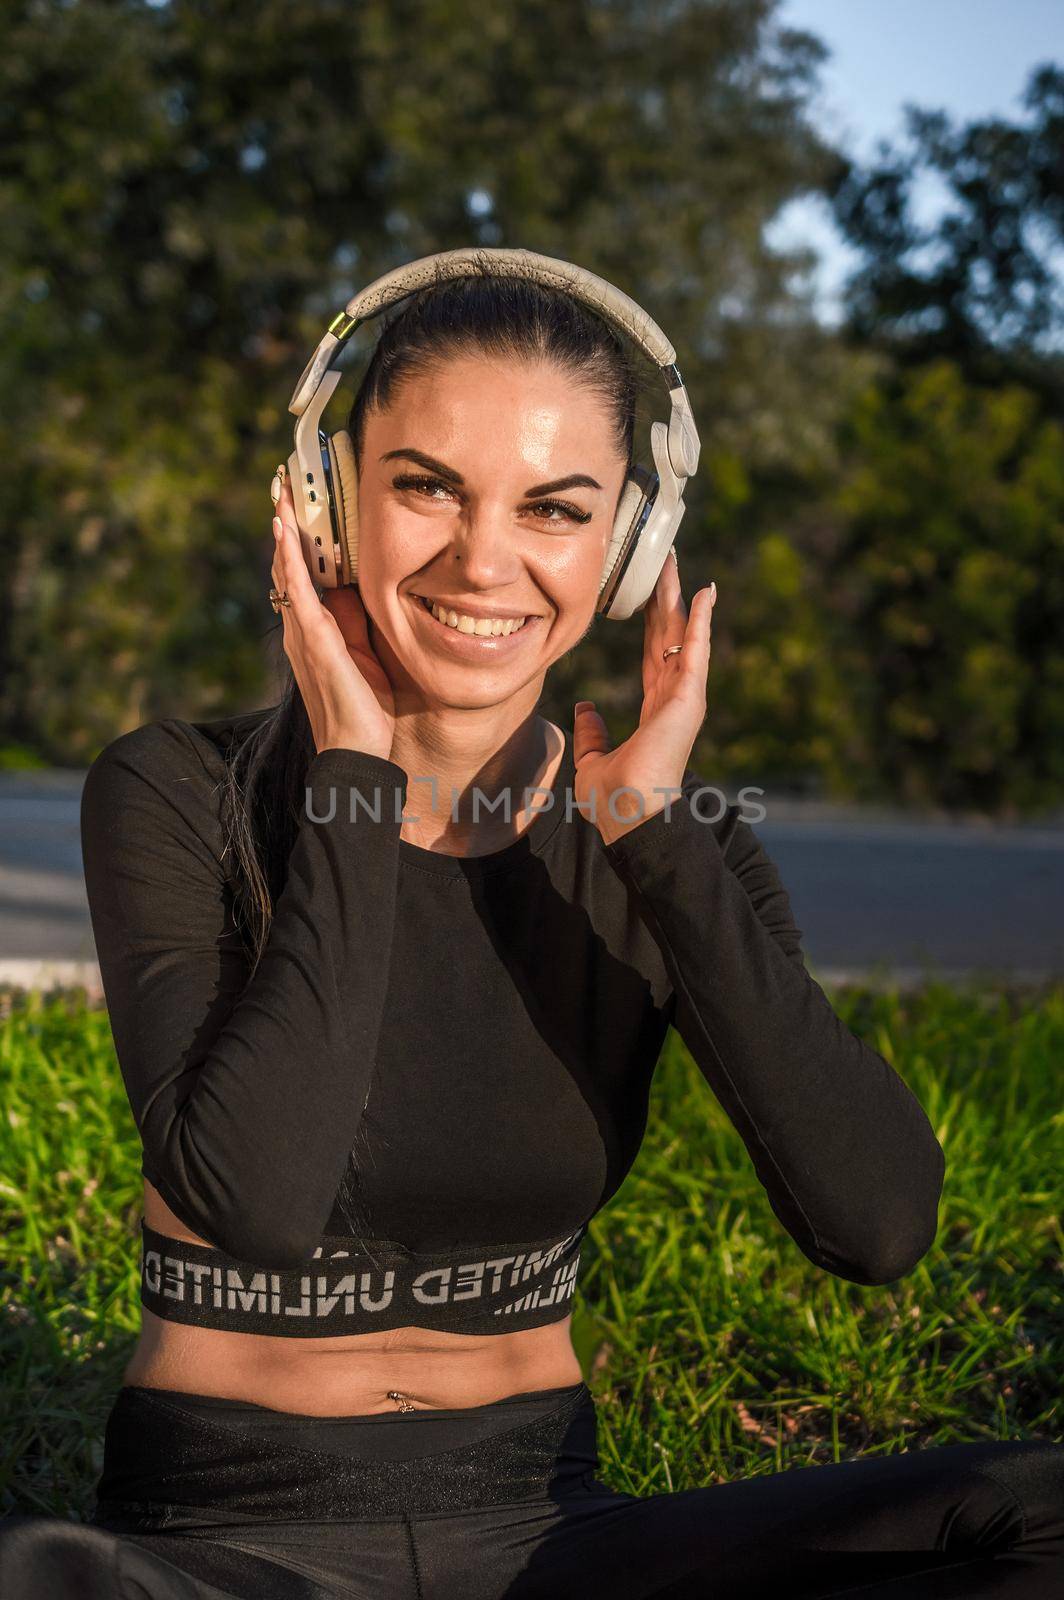 Sporty girl with headphones outdoors enjoying music by Proff